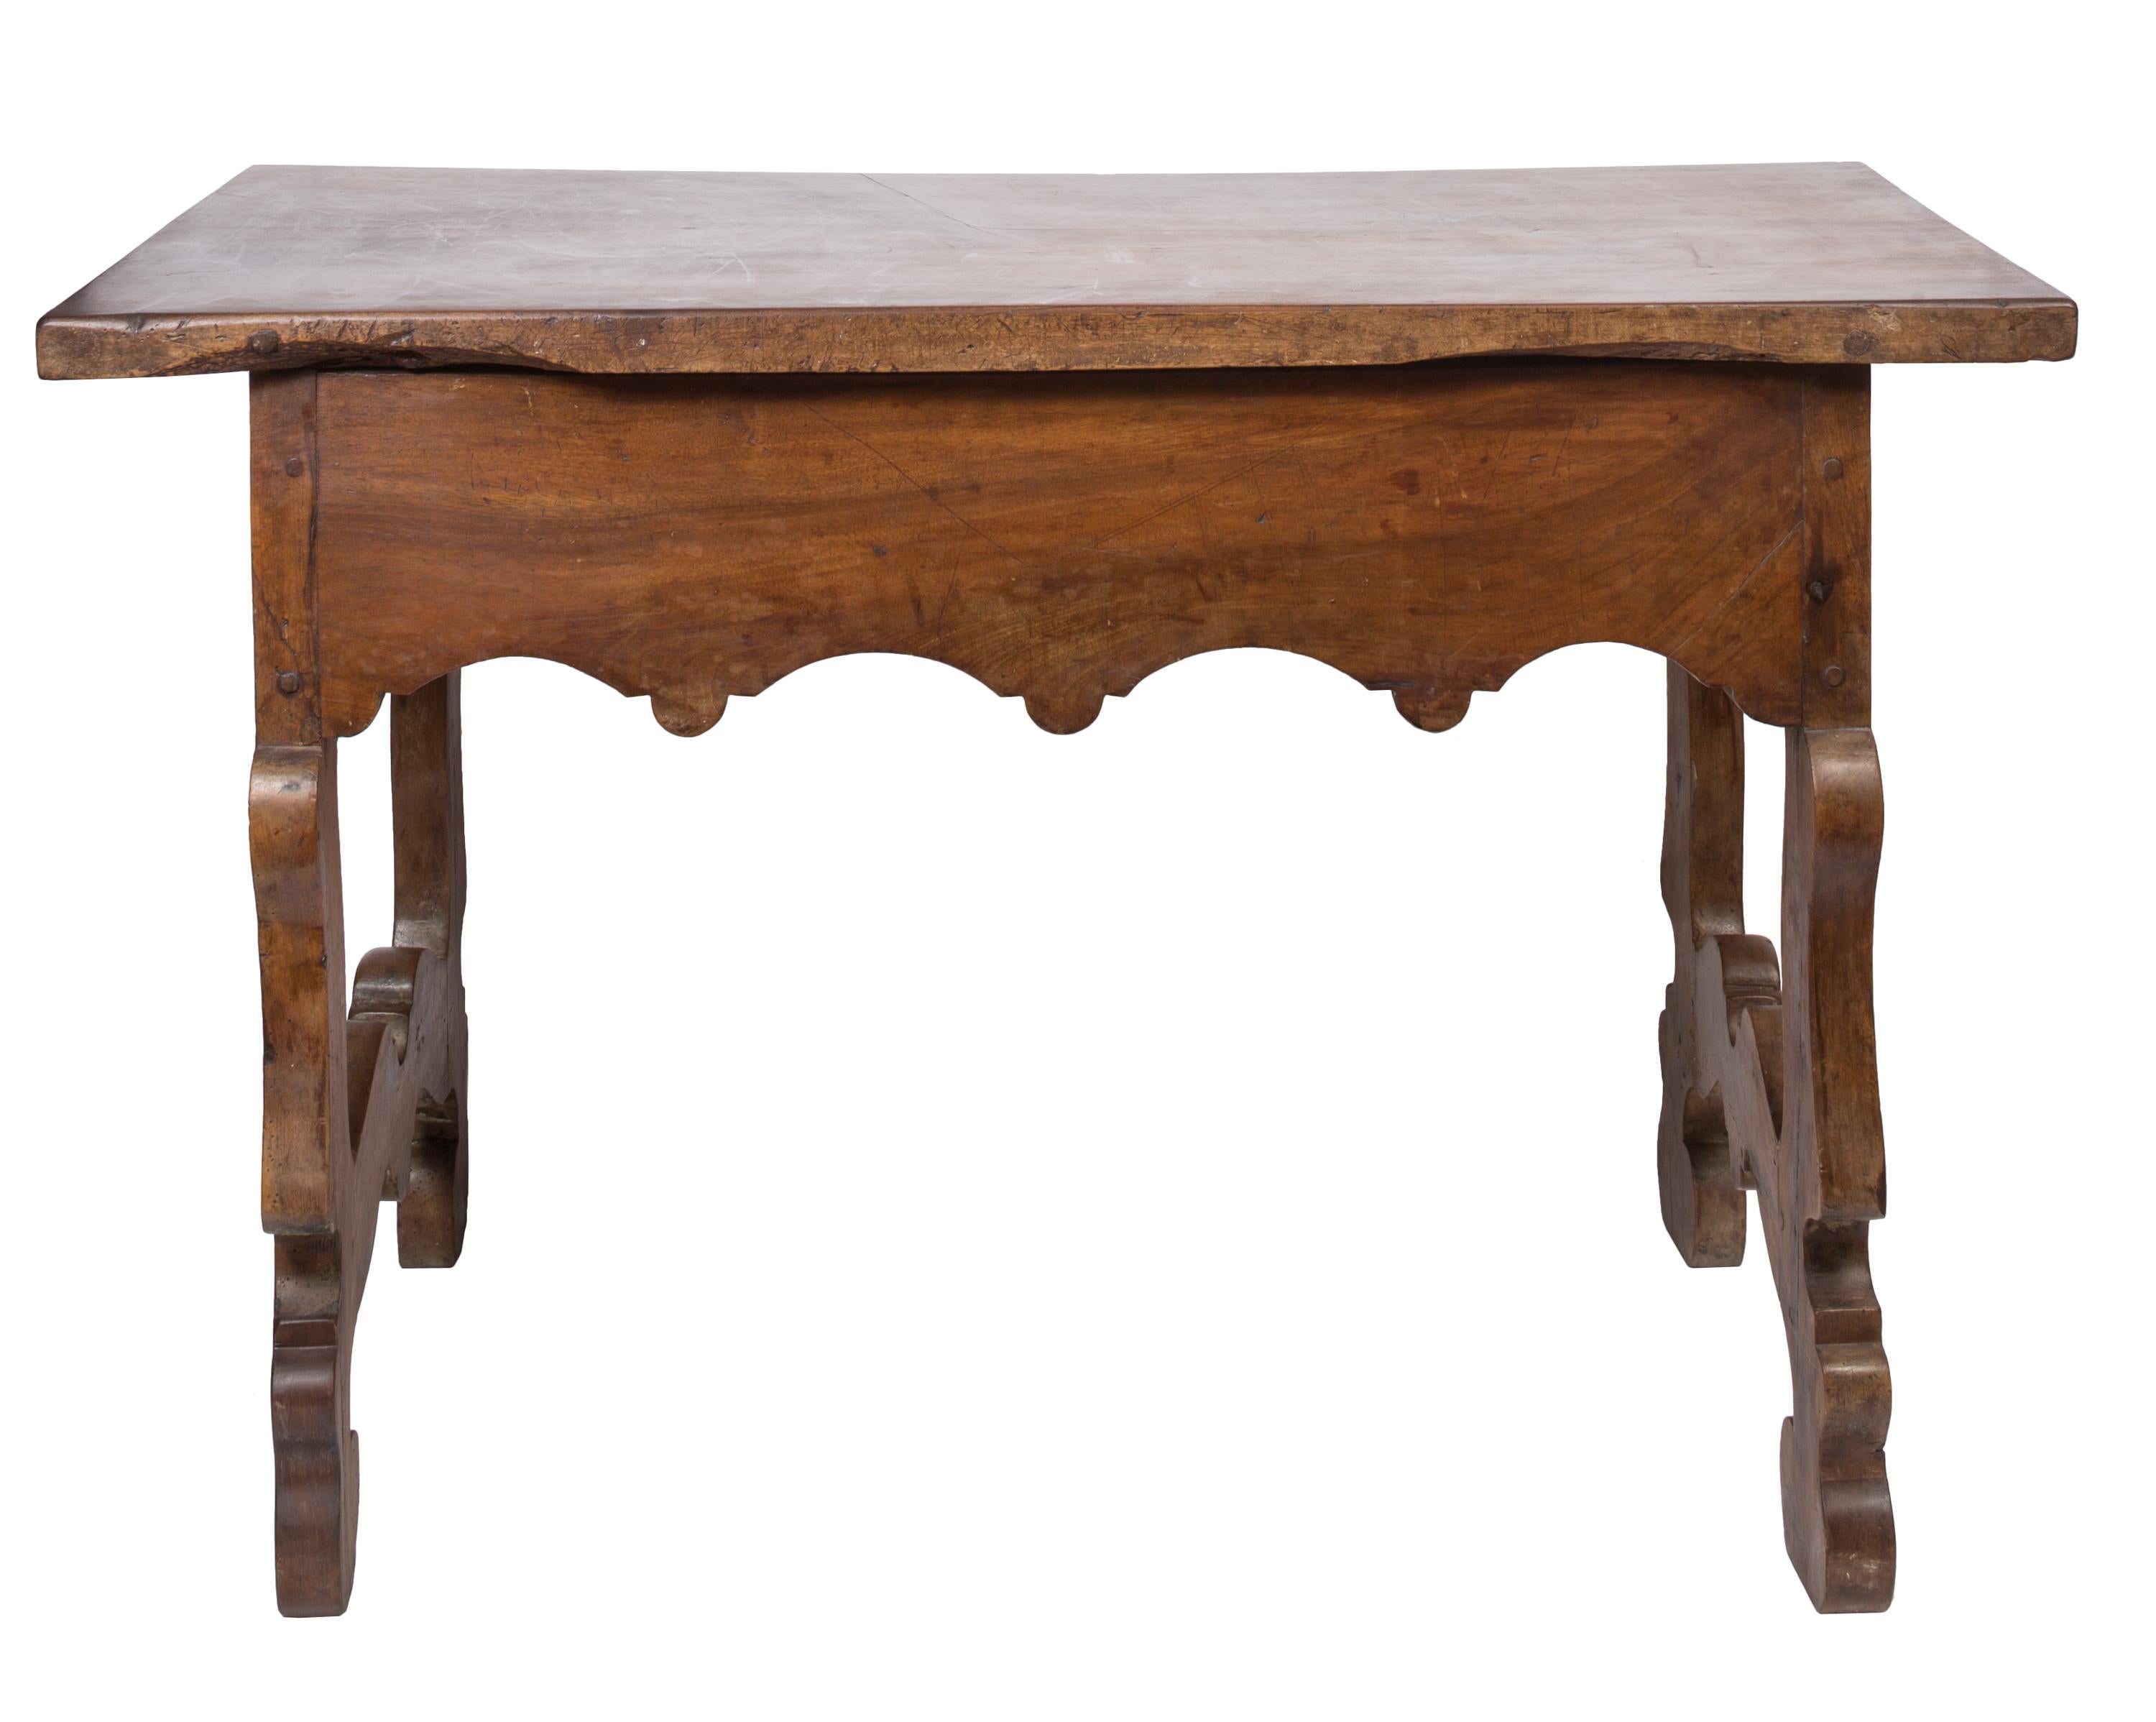 A beautiful and historic Spanish writing table with traditional mixtilineal “pata de lira” (lyre-shaped legs) containing both curves and straight lines, in keeping with the Baroque style popular during the reign of Charles II in the second half of